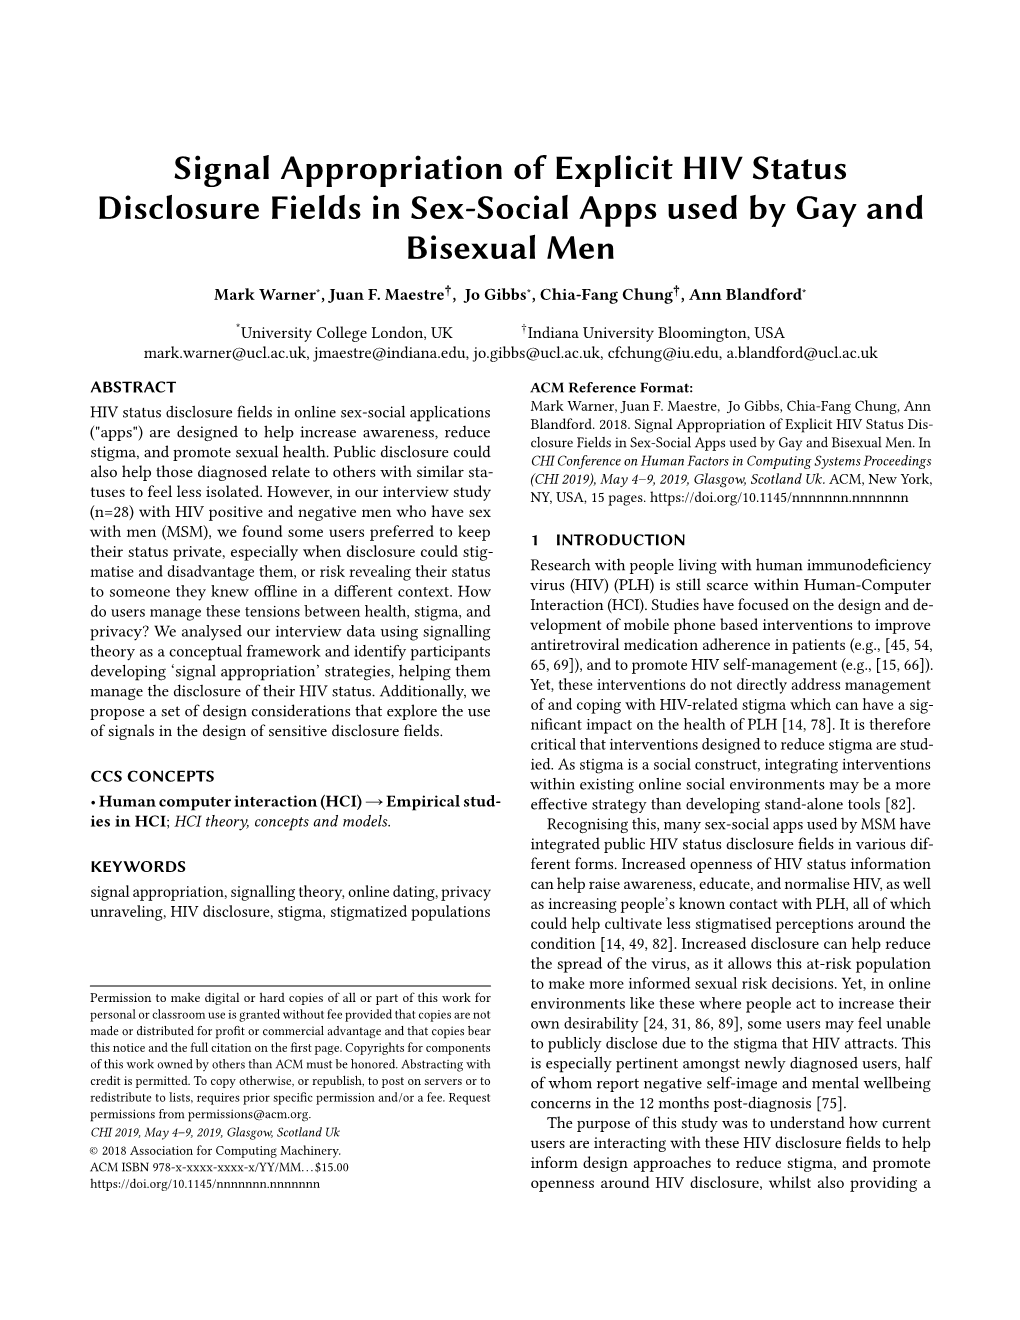 Signal Appropriation of Explicit HIV Status Disclosure Fields in Sex-Social Apps Used by Gay and Bisexual Men